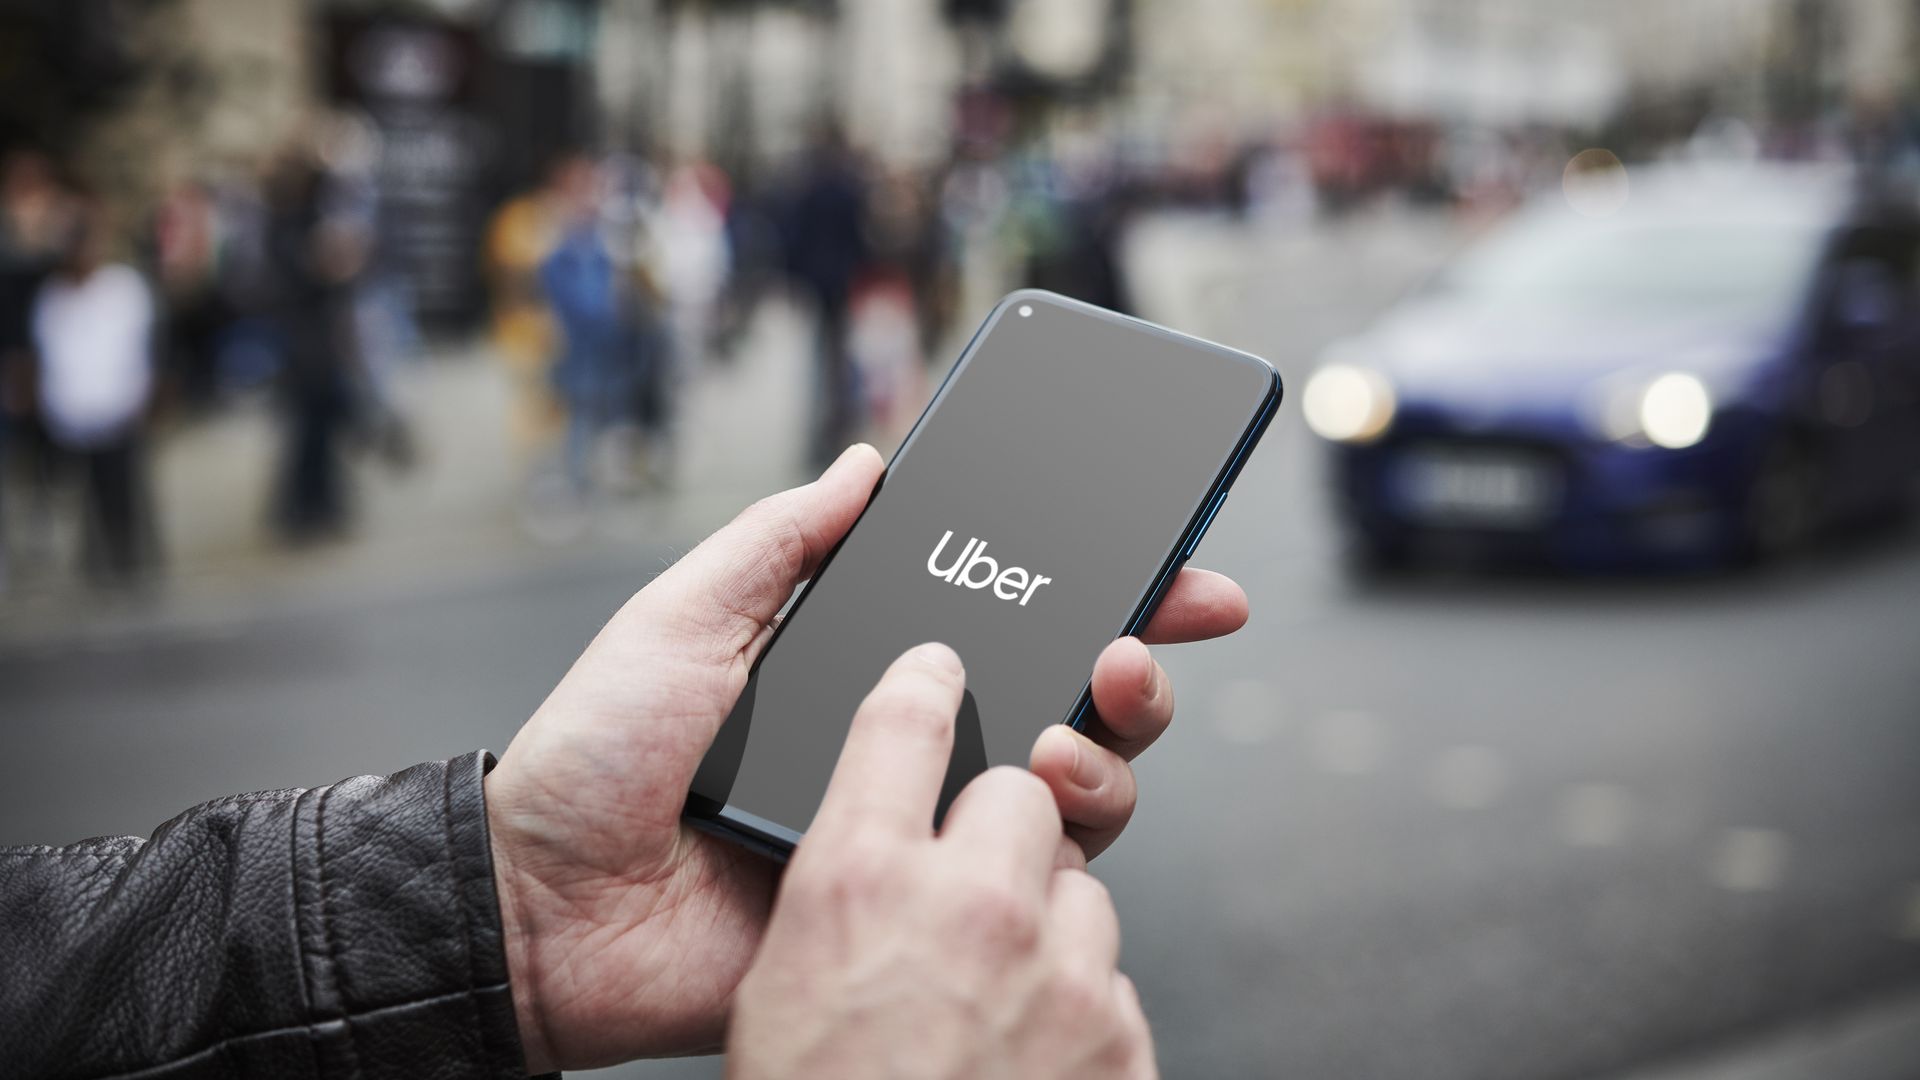 Detail of a man holding up an Honor 20 Pro smartphone with the Uber transport app visible on screen, while taxis queue in the background